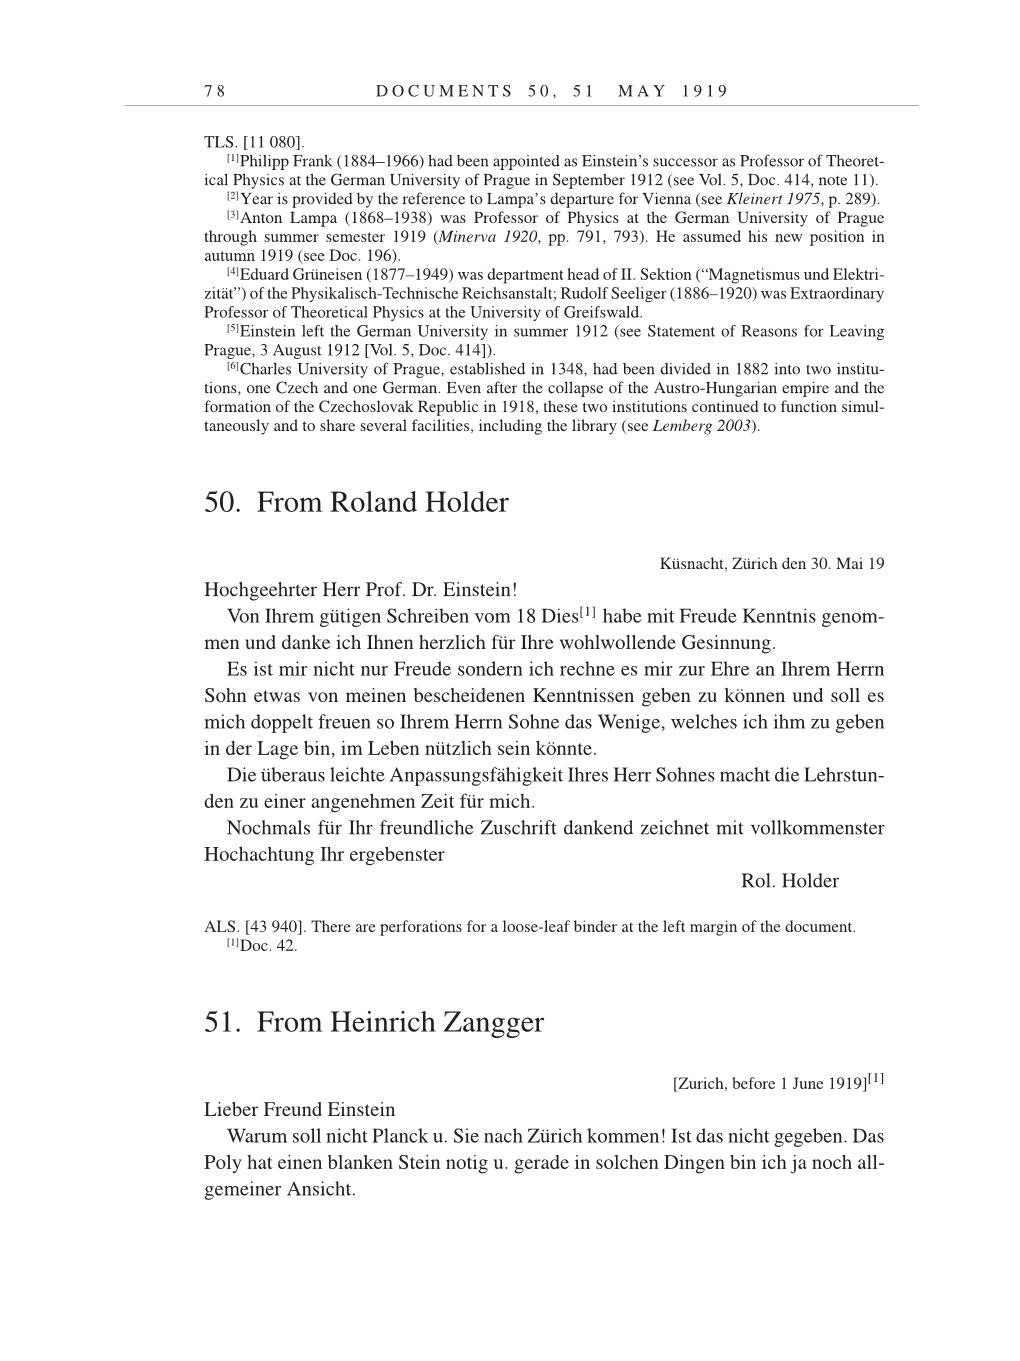 Volume 9: The Berlin Years: Correspondence January 1919-April 1920 page 78